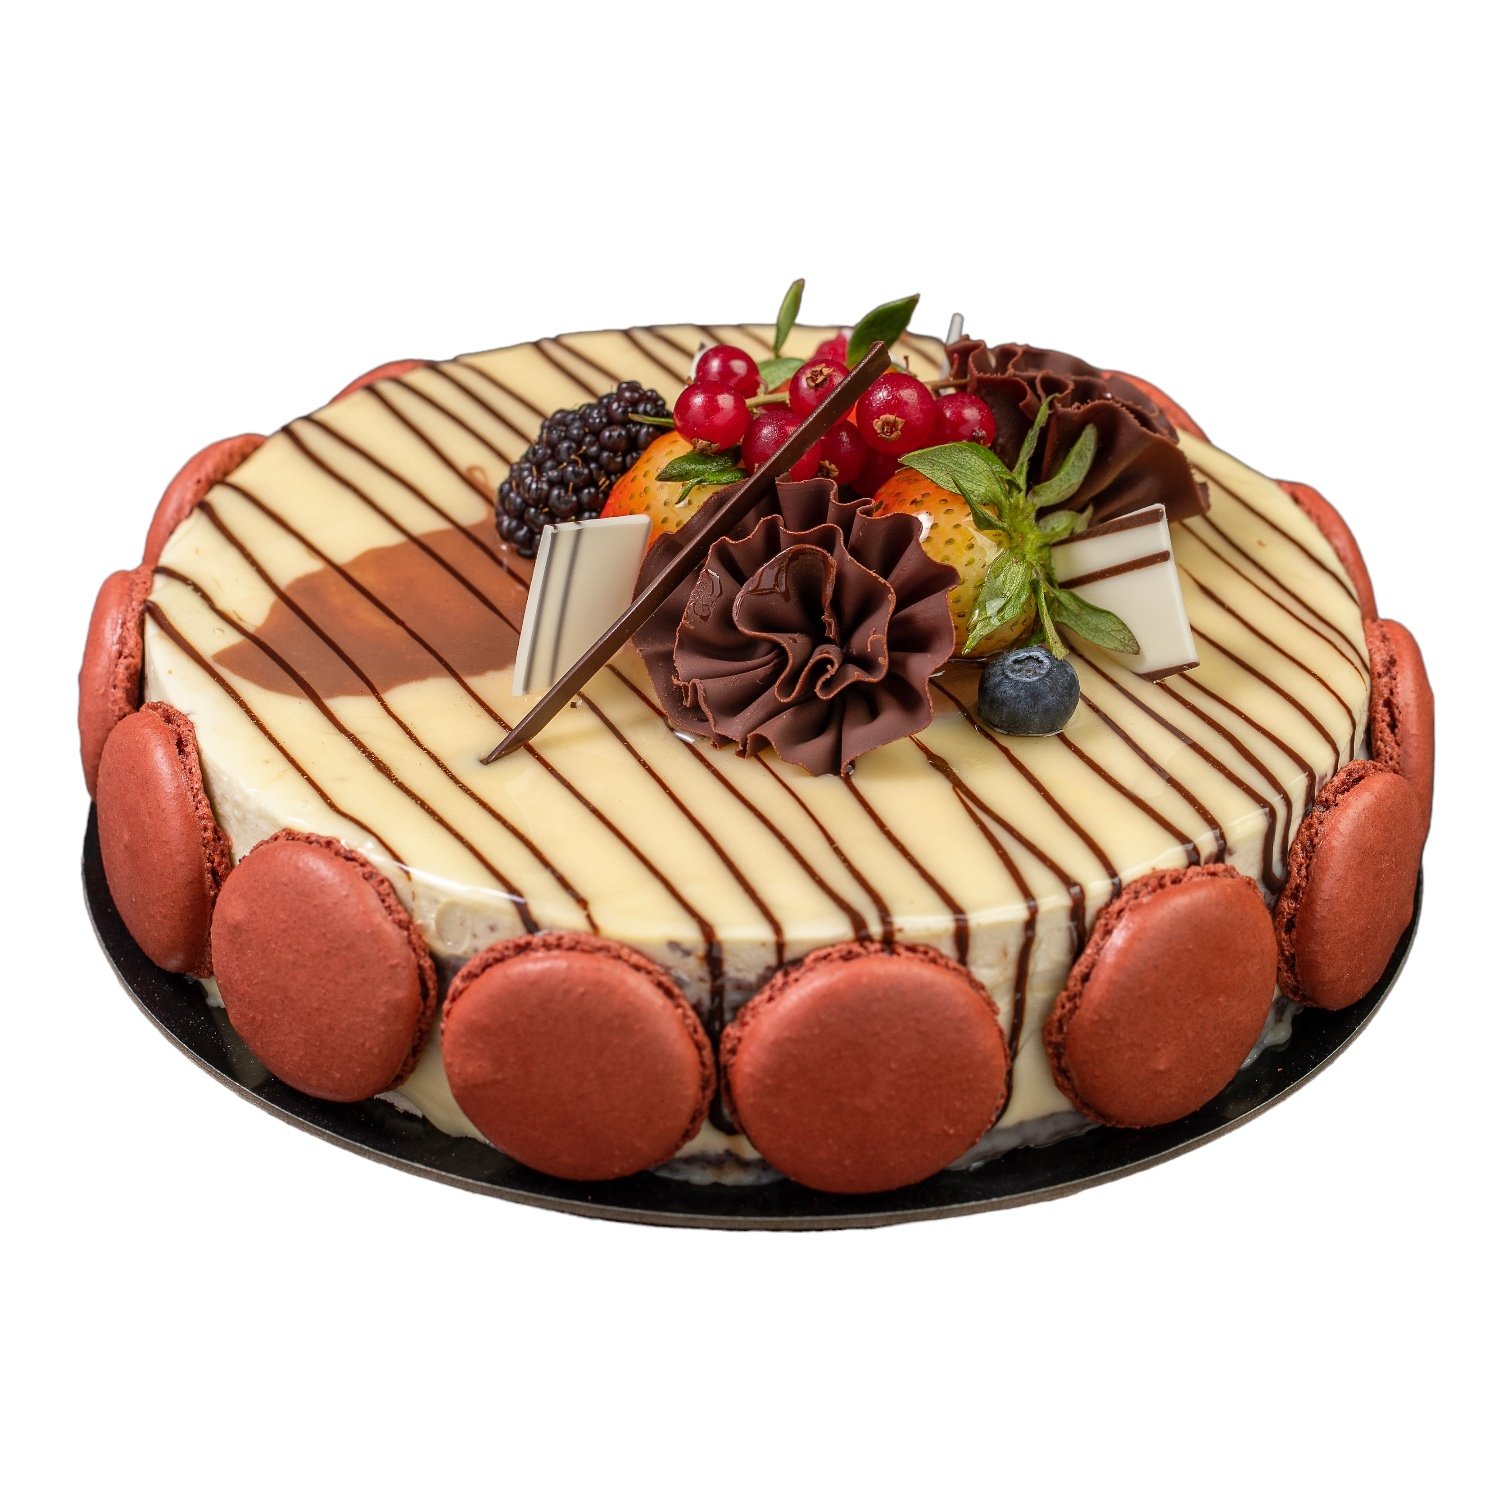 JAY'S CAKES | Handcrafted and Custom Cakes in Abu Dhabi, UAE